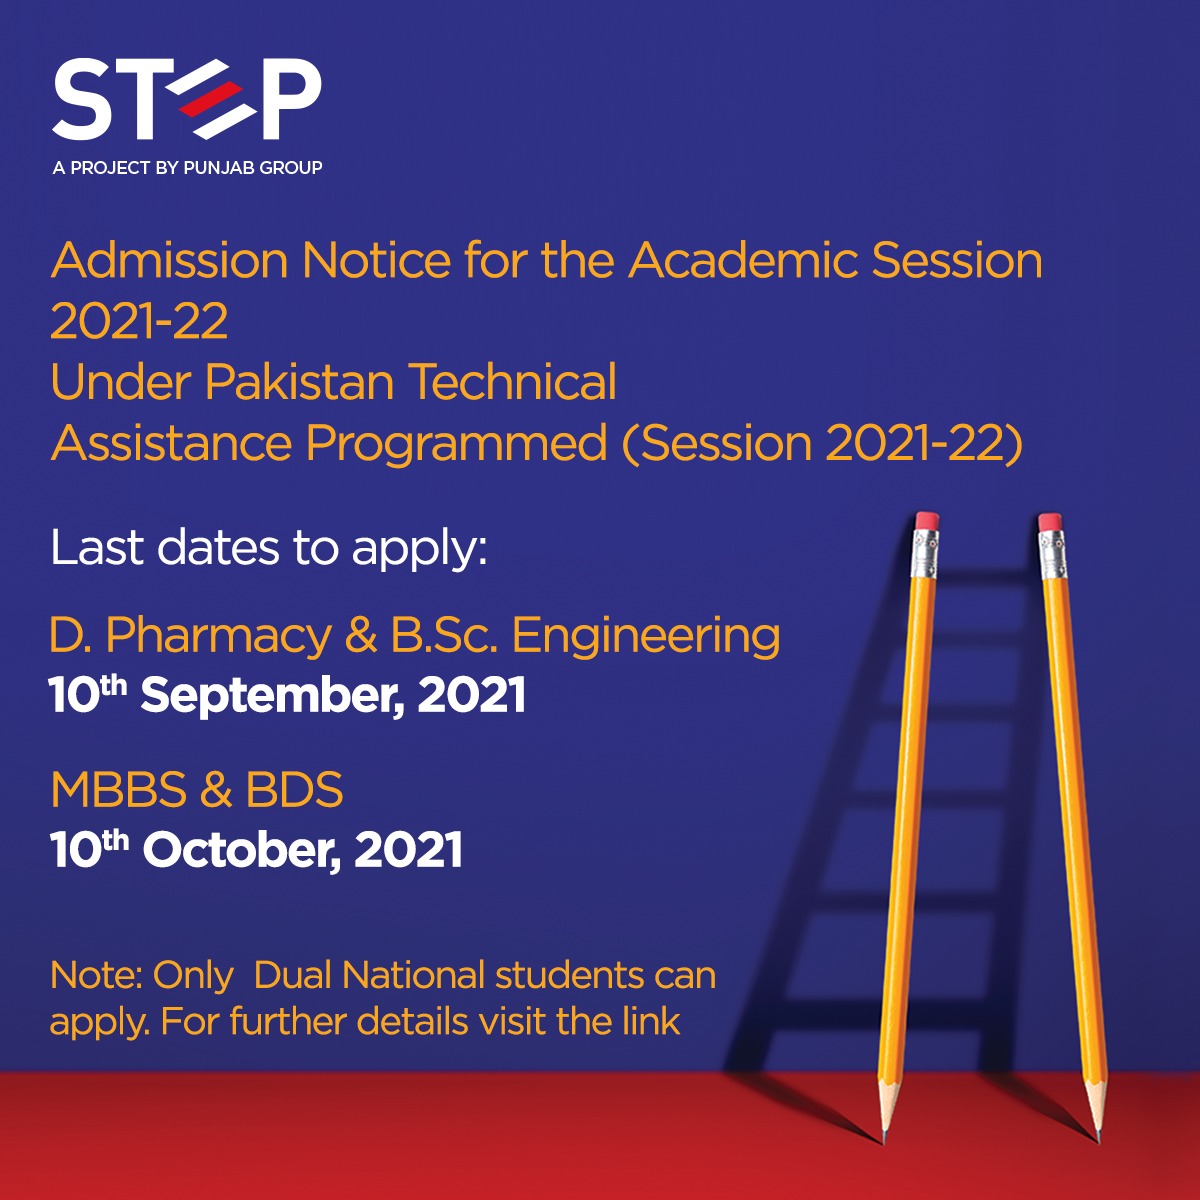 Admission Notice for the Academic Session 2021-22 Under Pakistan Technical Assistance Programmed